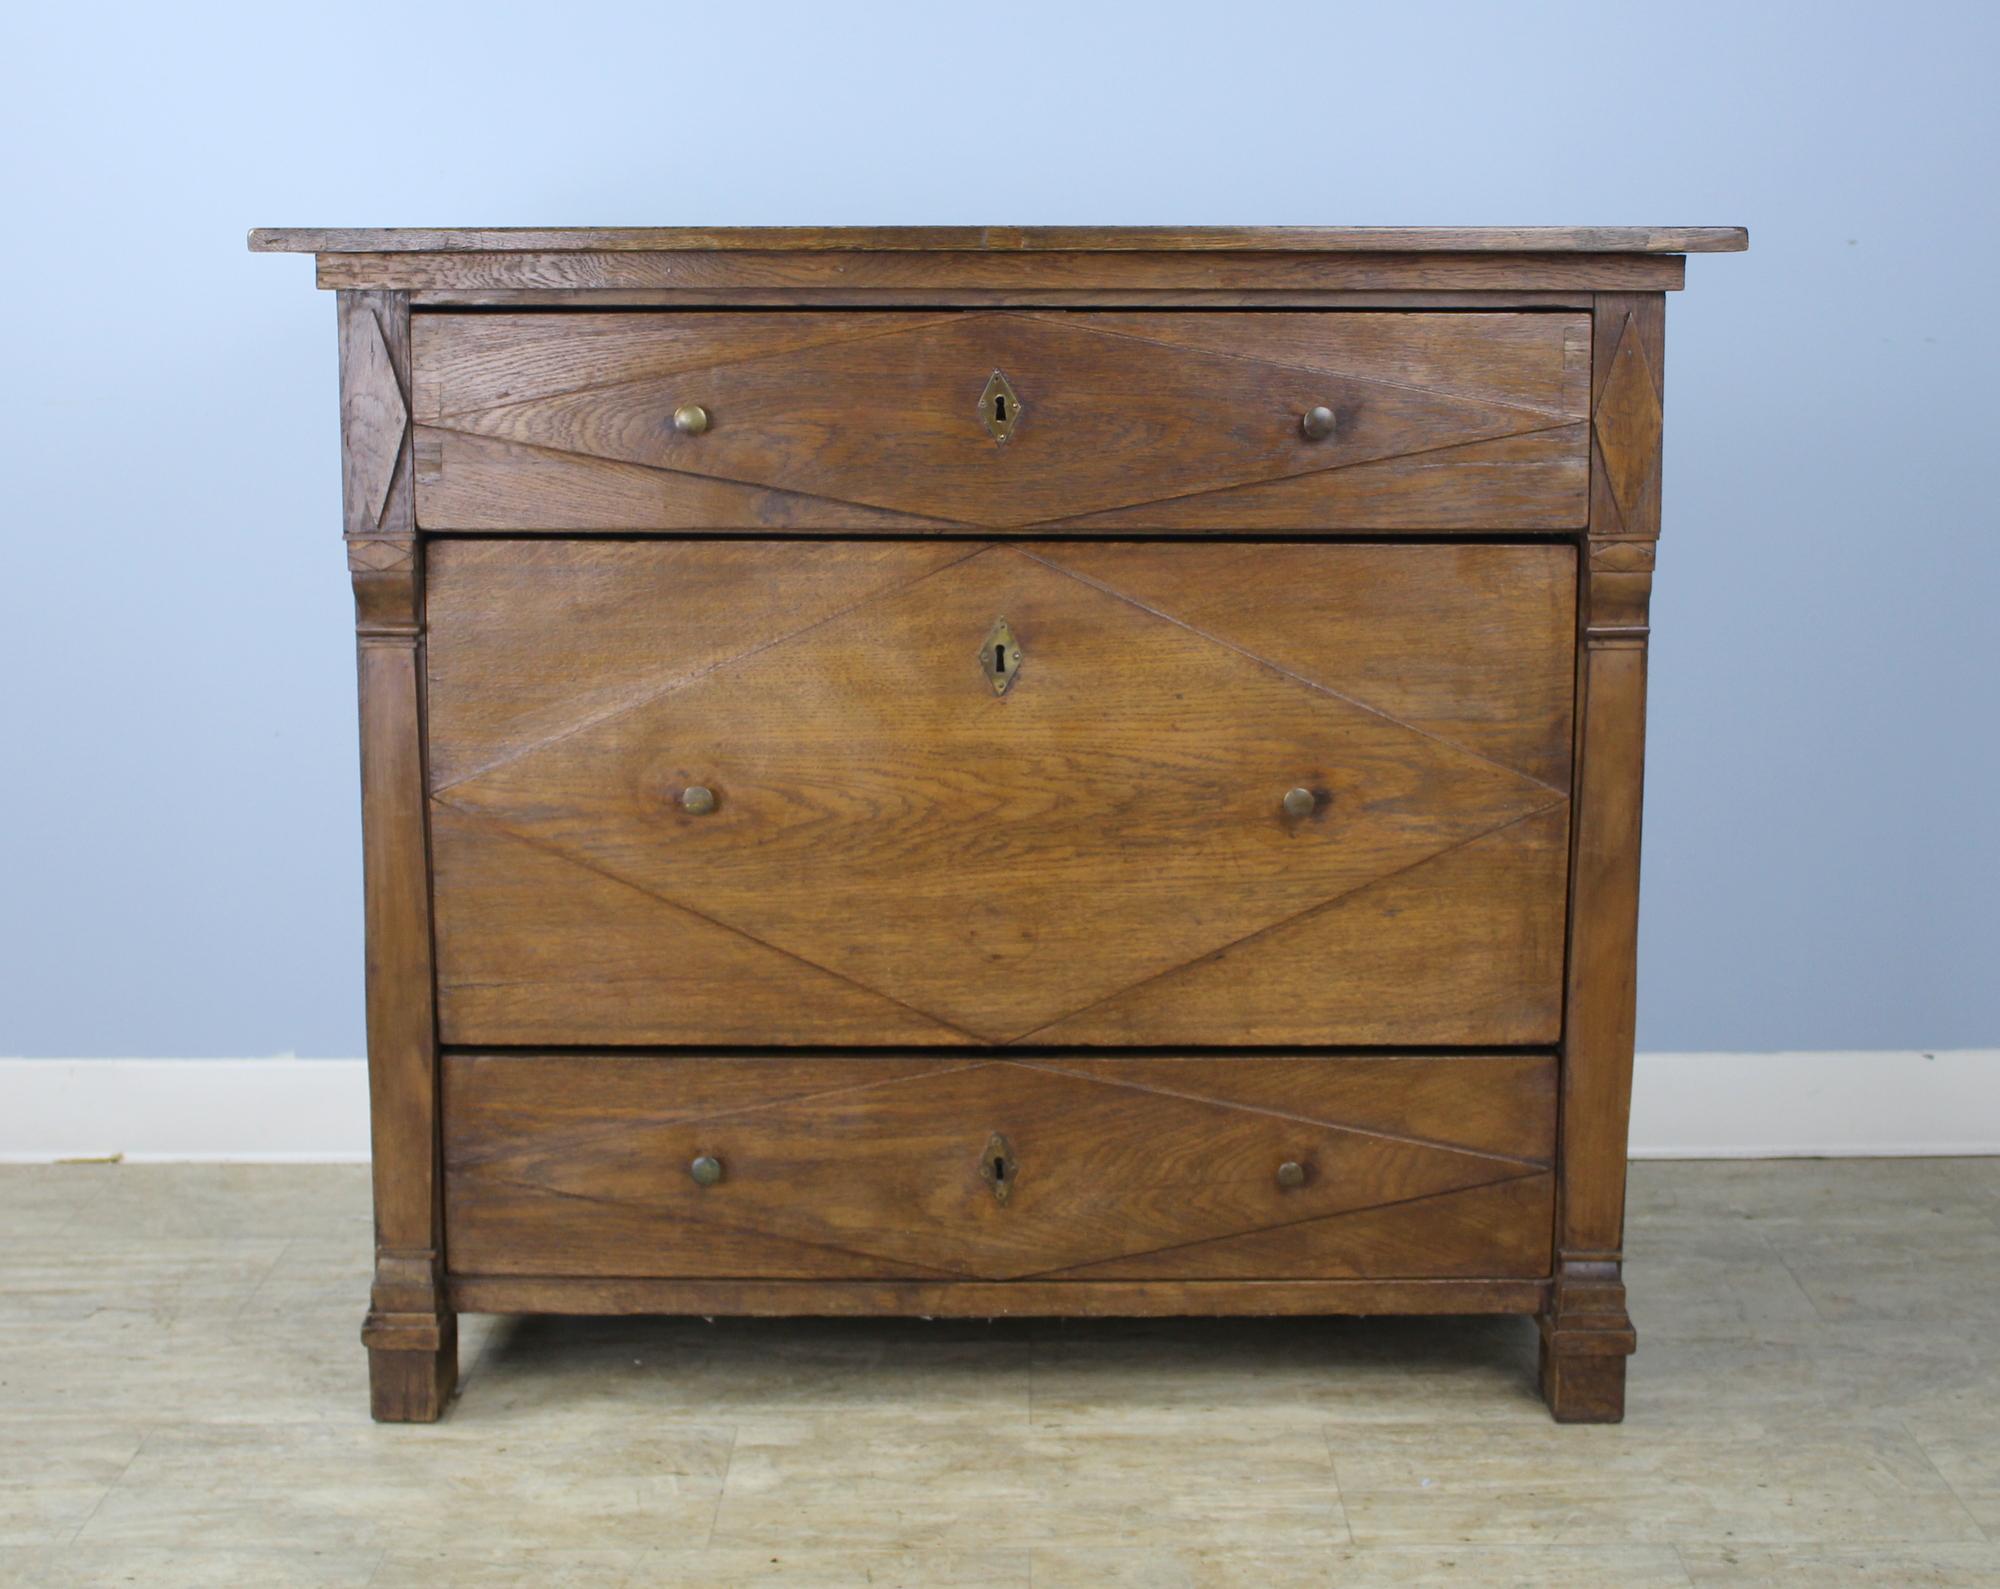 A handsome large French chest of drawers in dark chestnut. All three drawers display a typical diamond motif, the center drawer boasting a double depth. The top is in good antique condition with nice color and patina, and the stylized feet add to